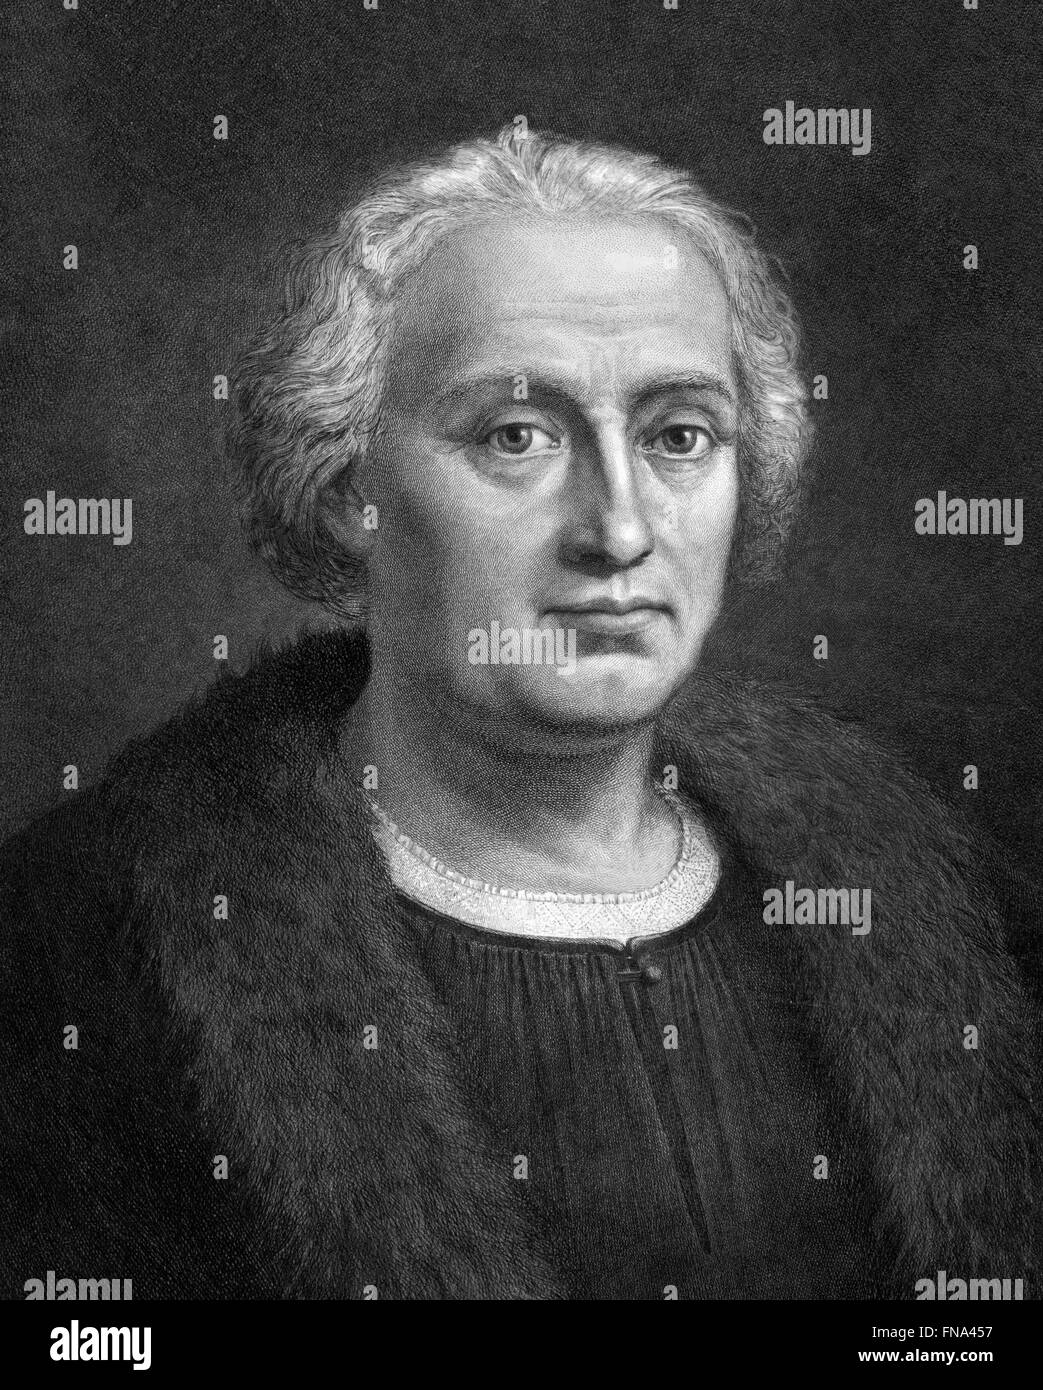 Christopher Columbus. Etching by F. Focillon after painting by Bartholomeo de Suardo, 1892 Stock Photo